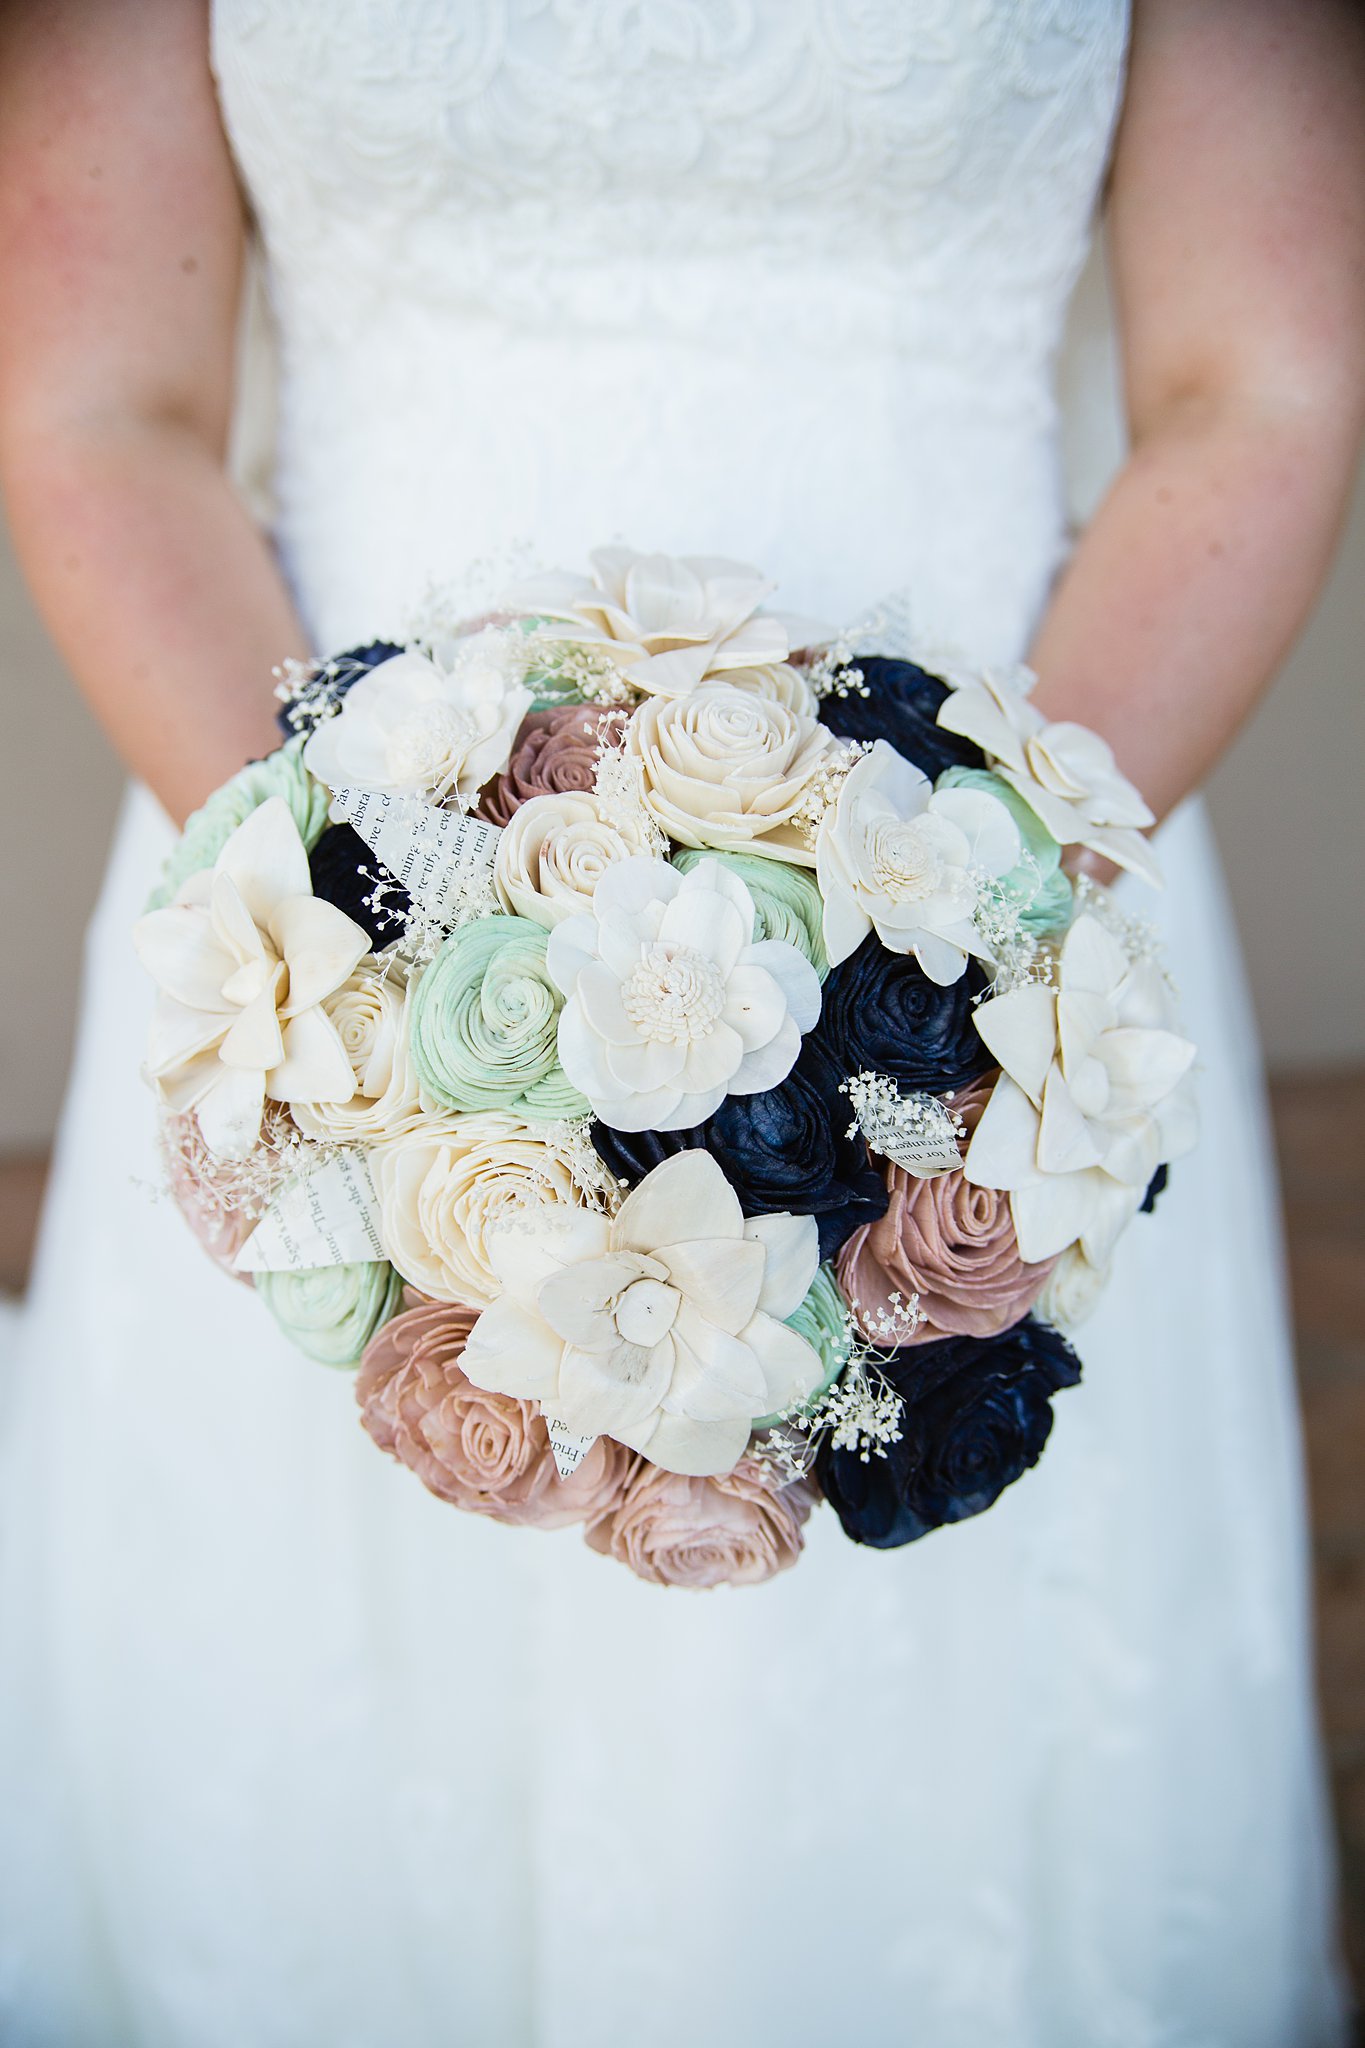 Bride's wood flower bouquet by PMA Photography.